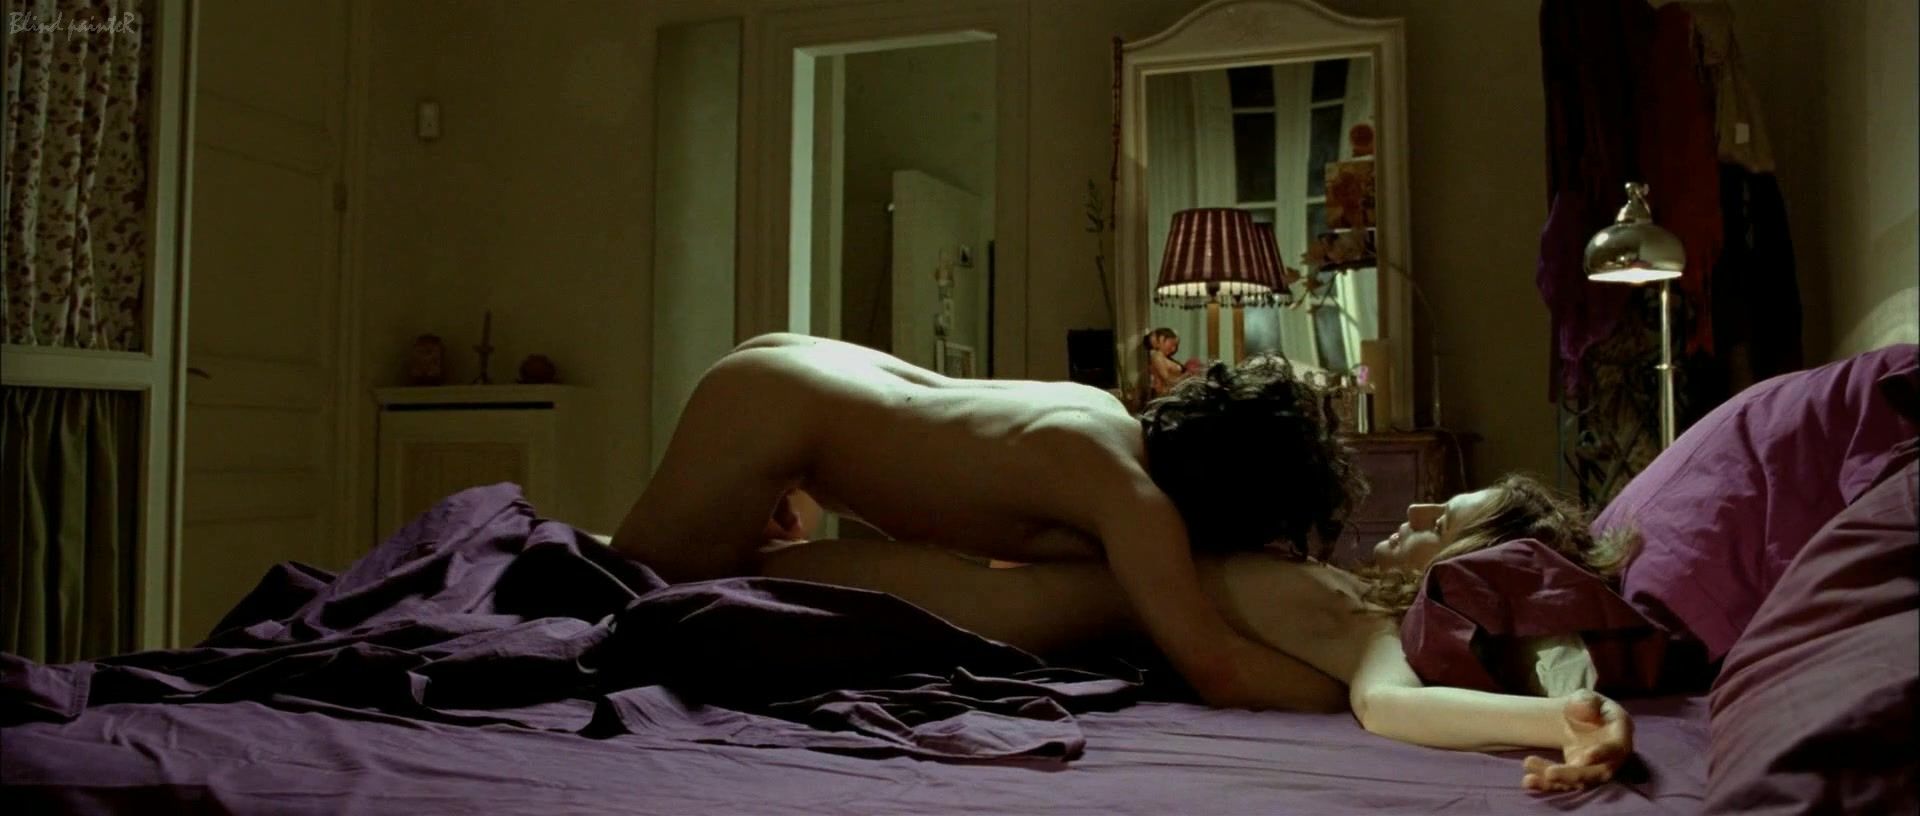 Hot Naked Girl Sex Scenes of Belen Fabra & Alba Ribas from the movie "Diary Of A Nymphomaniac" (2008) Asses